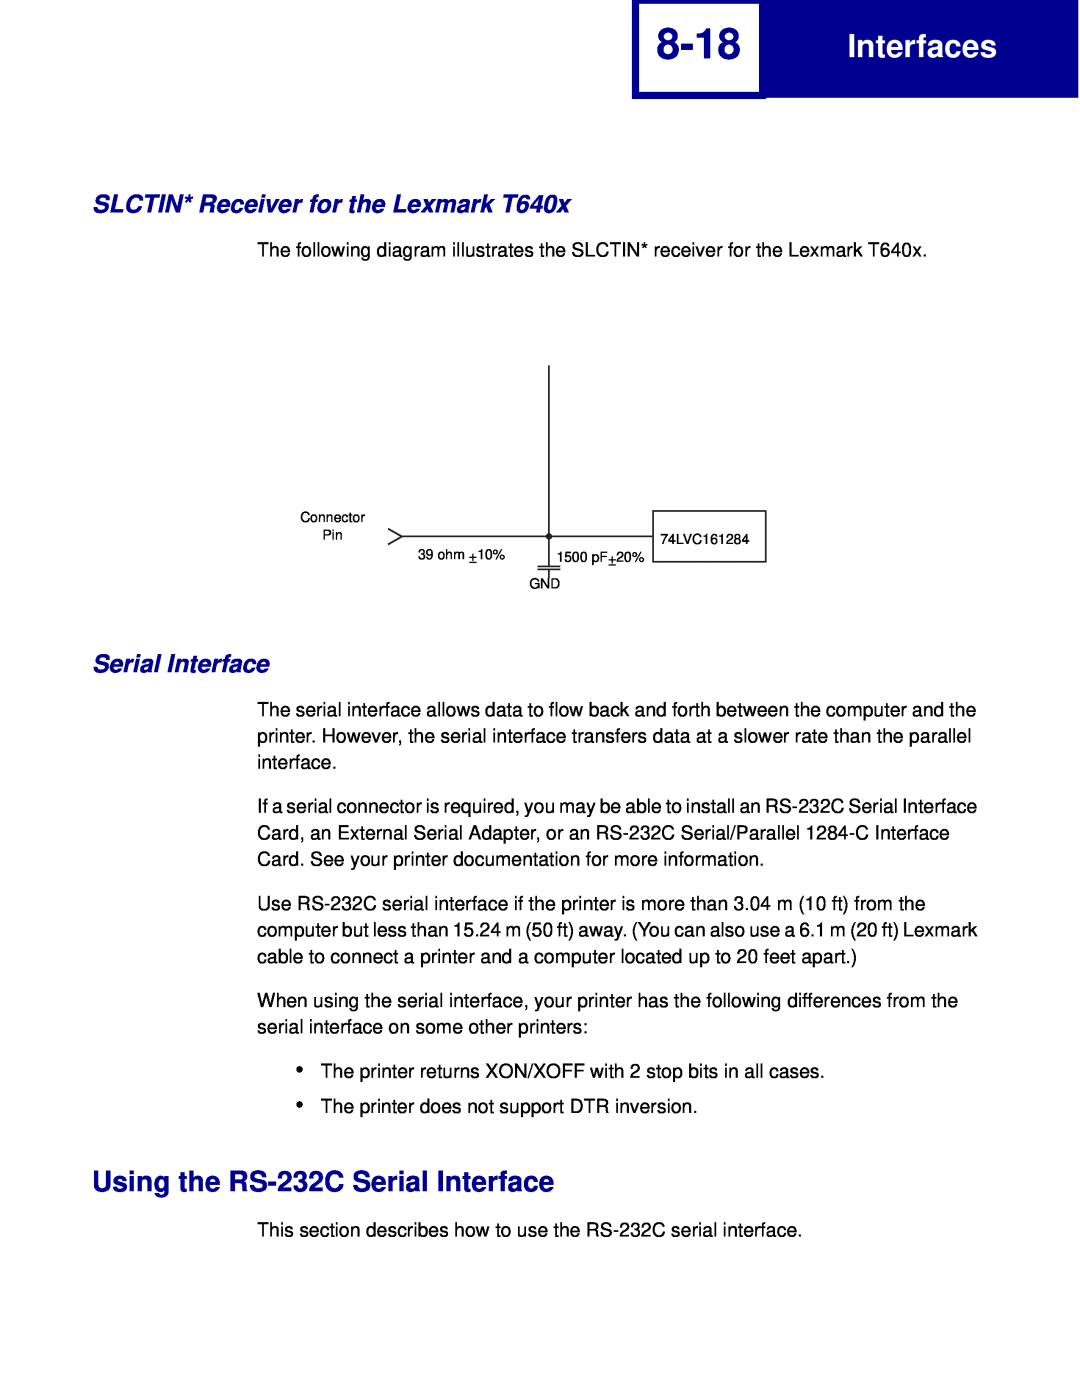 Lexmark C760, C762 manual 8-18, Using the RS-232C Serial Interface, SLCTIN* Receiver for the Lexmark T640x, Interfaces 